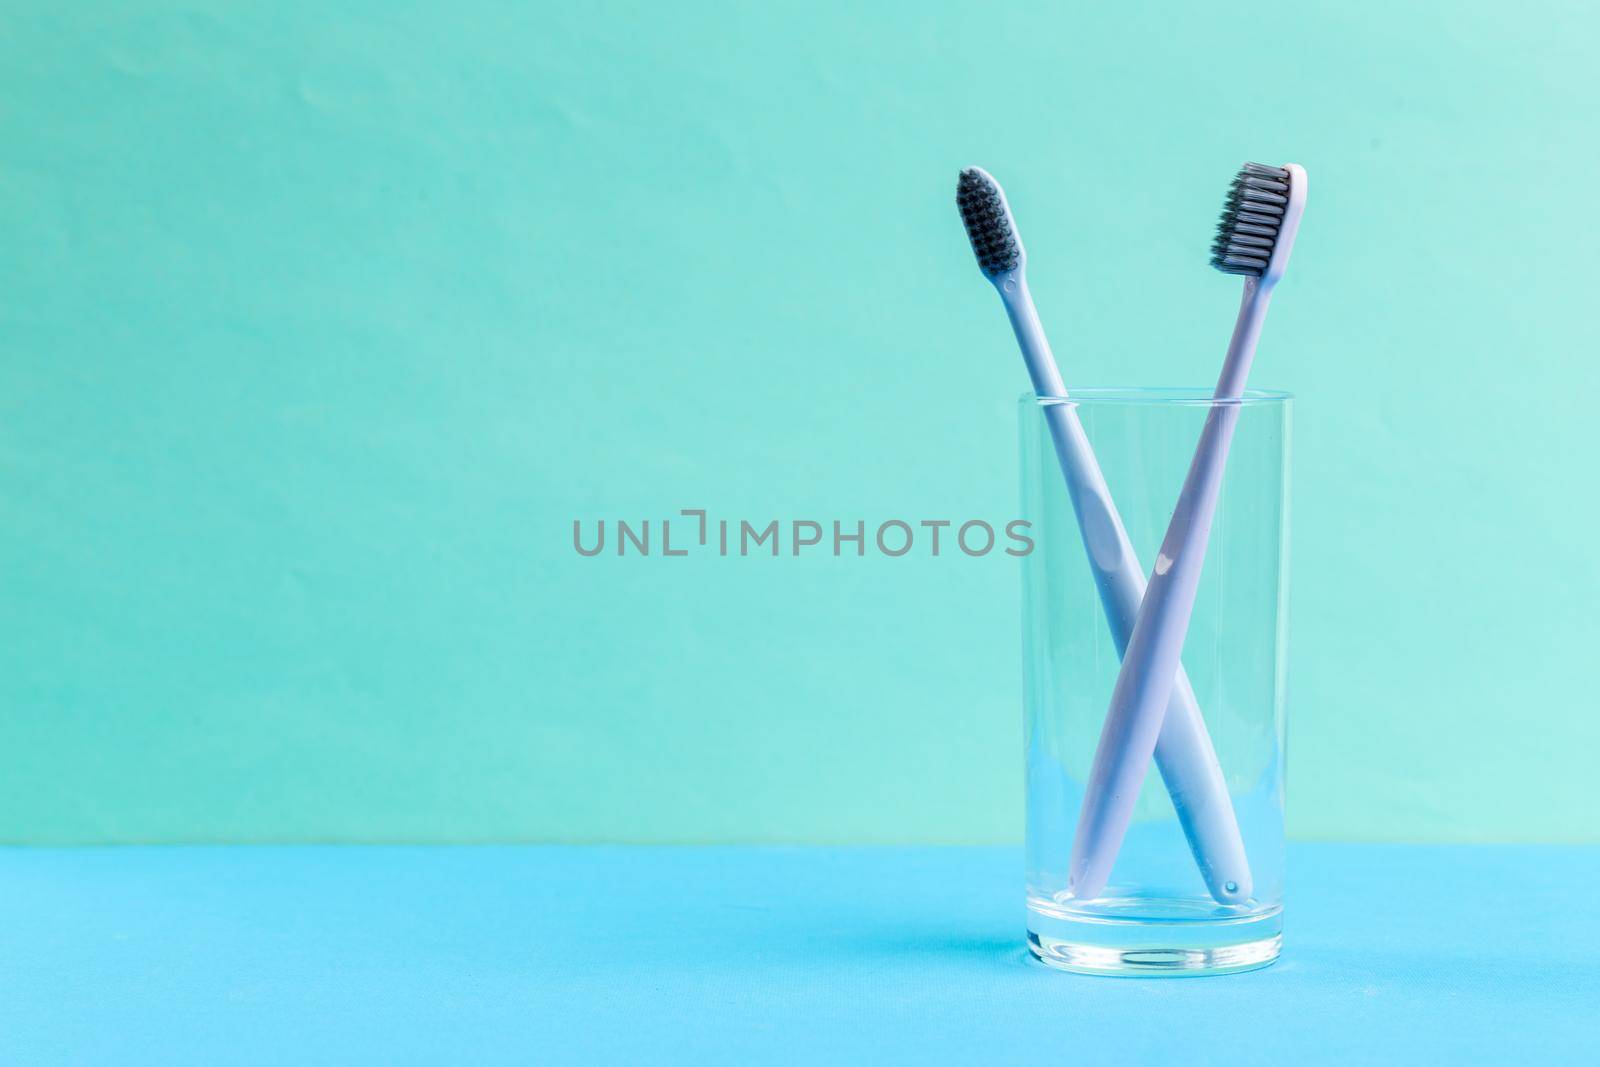 Toothbrushes in glass. creative photo.